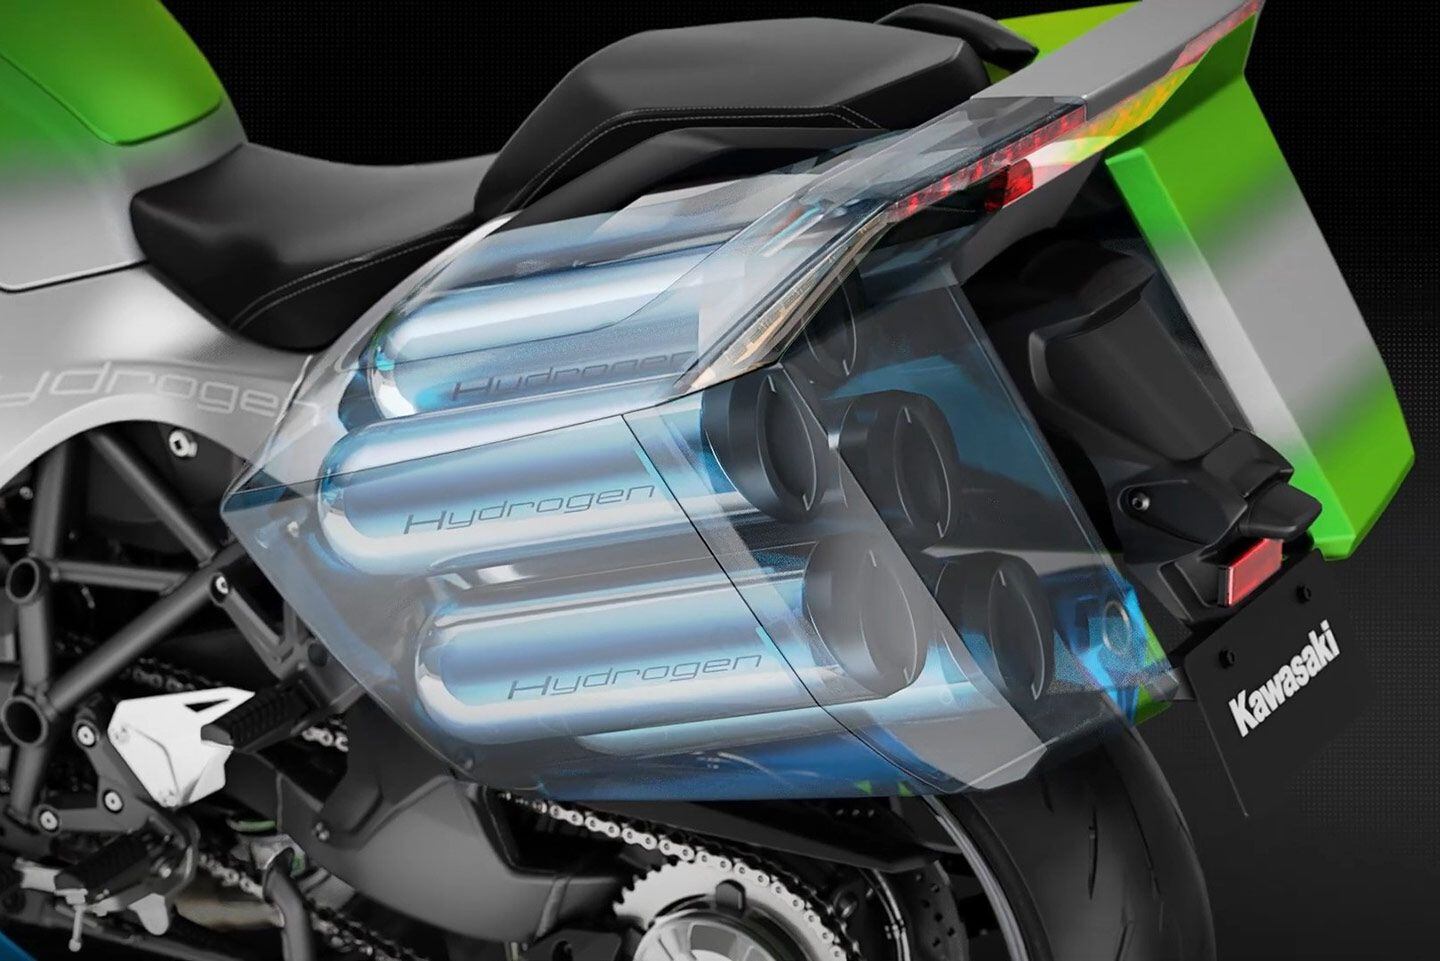 Will hydrogen power be the way forward for zero emissions for motorcycles? Major Japanese motorcycle manufacturers have formed an association to find out.